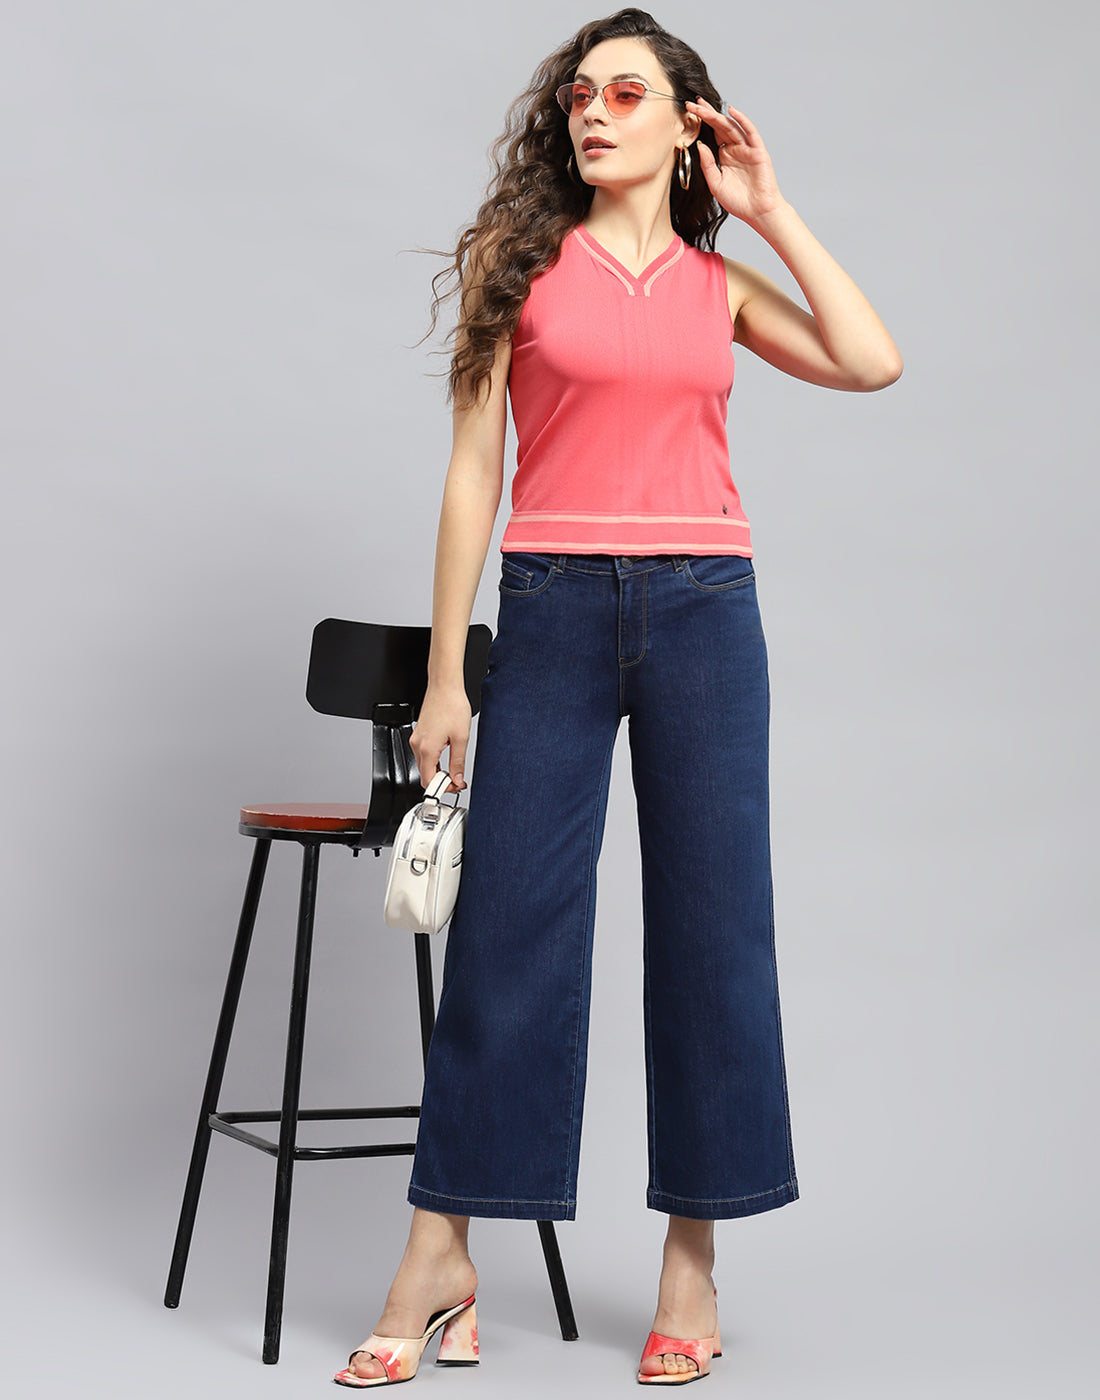 Women Pink Solid V Neck Sleeveless Top